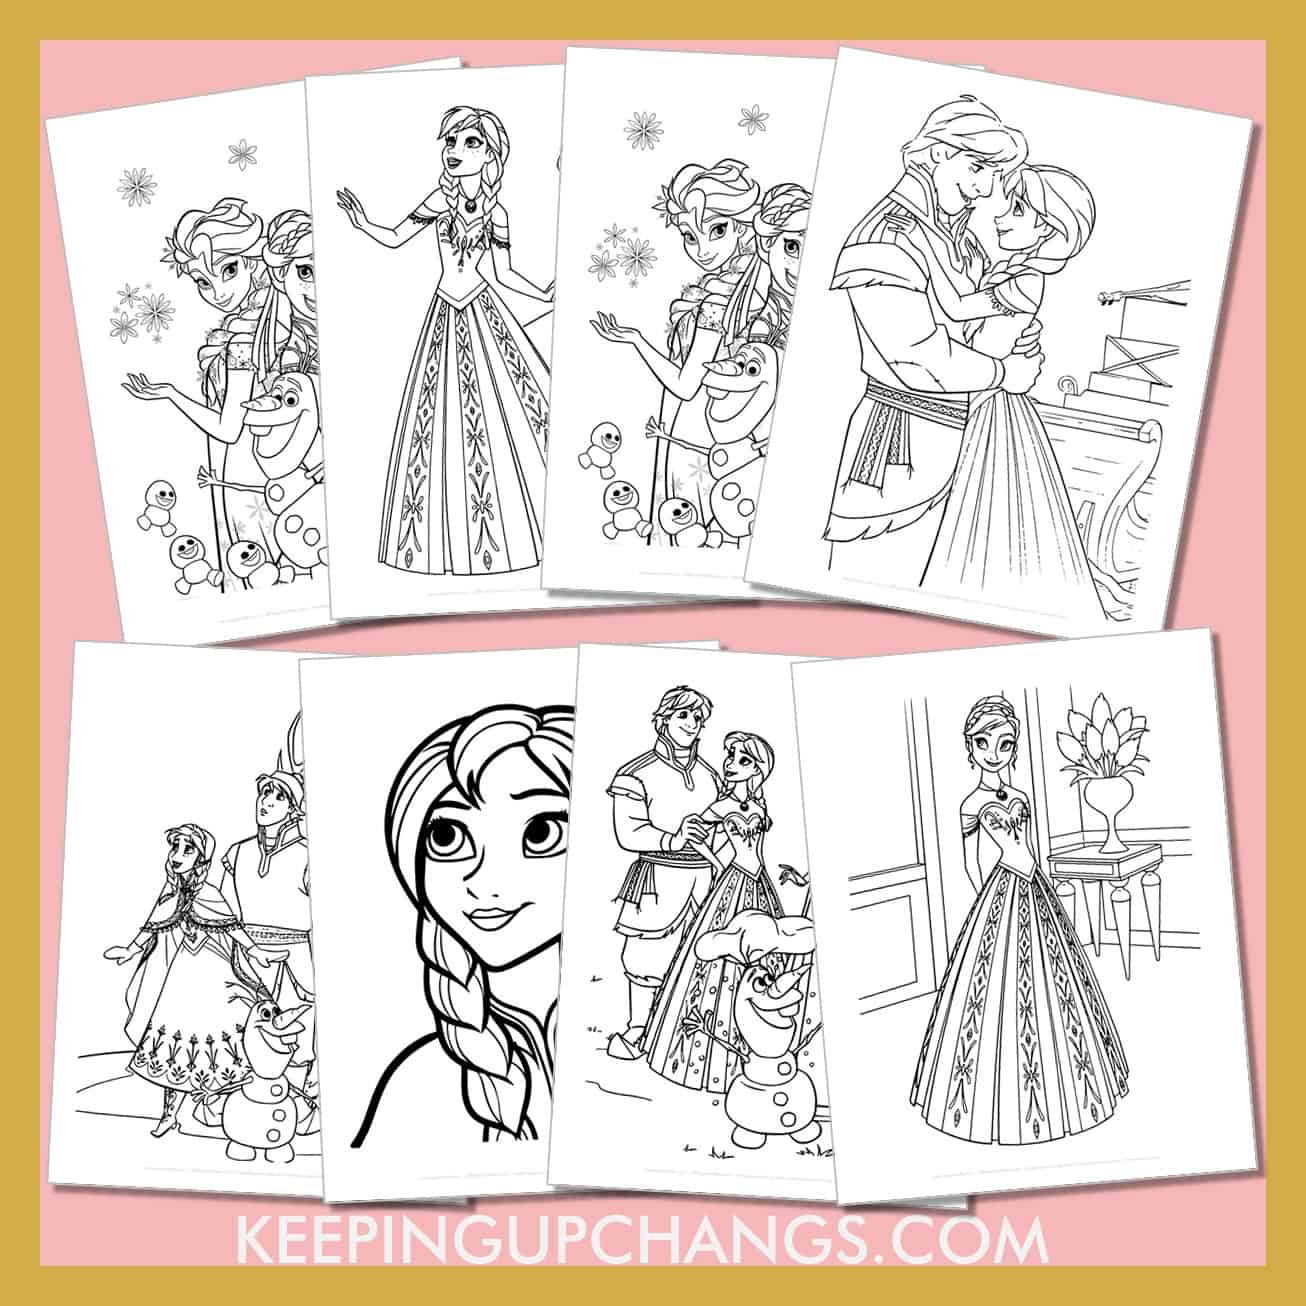 free anna frozem pictures to color for toddlers, kids, adults.